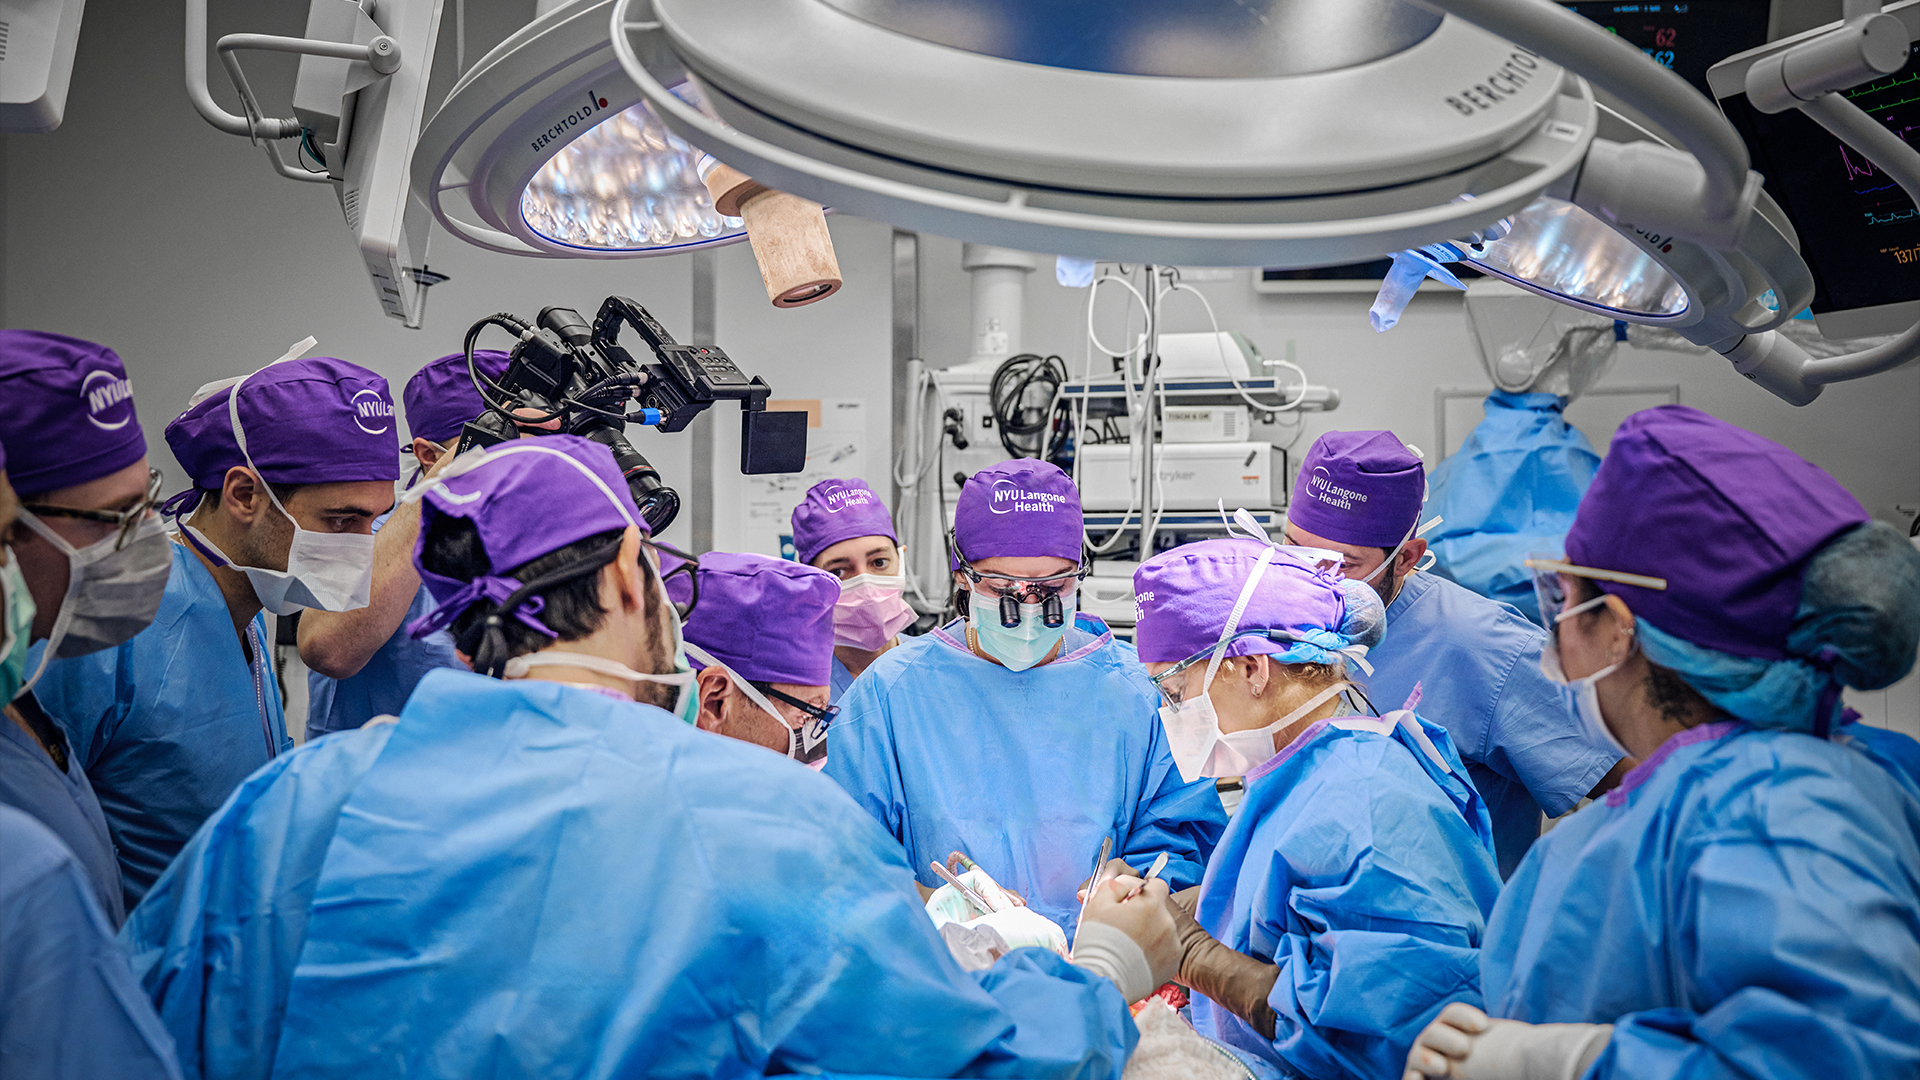 Doctors in blue medical gowns and purple surgical hats perform a surgery in an operating room.